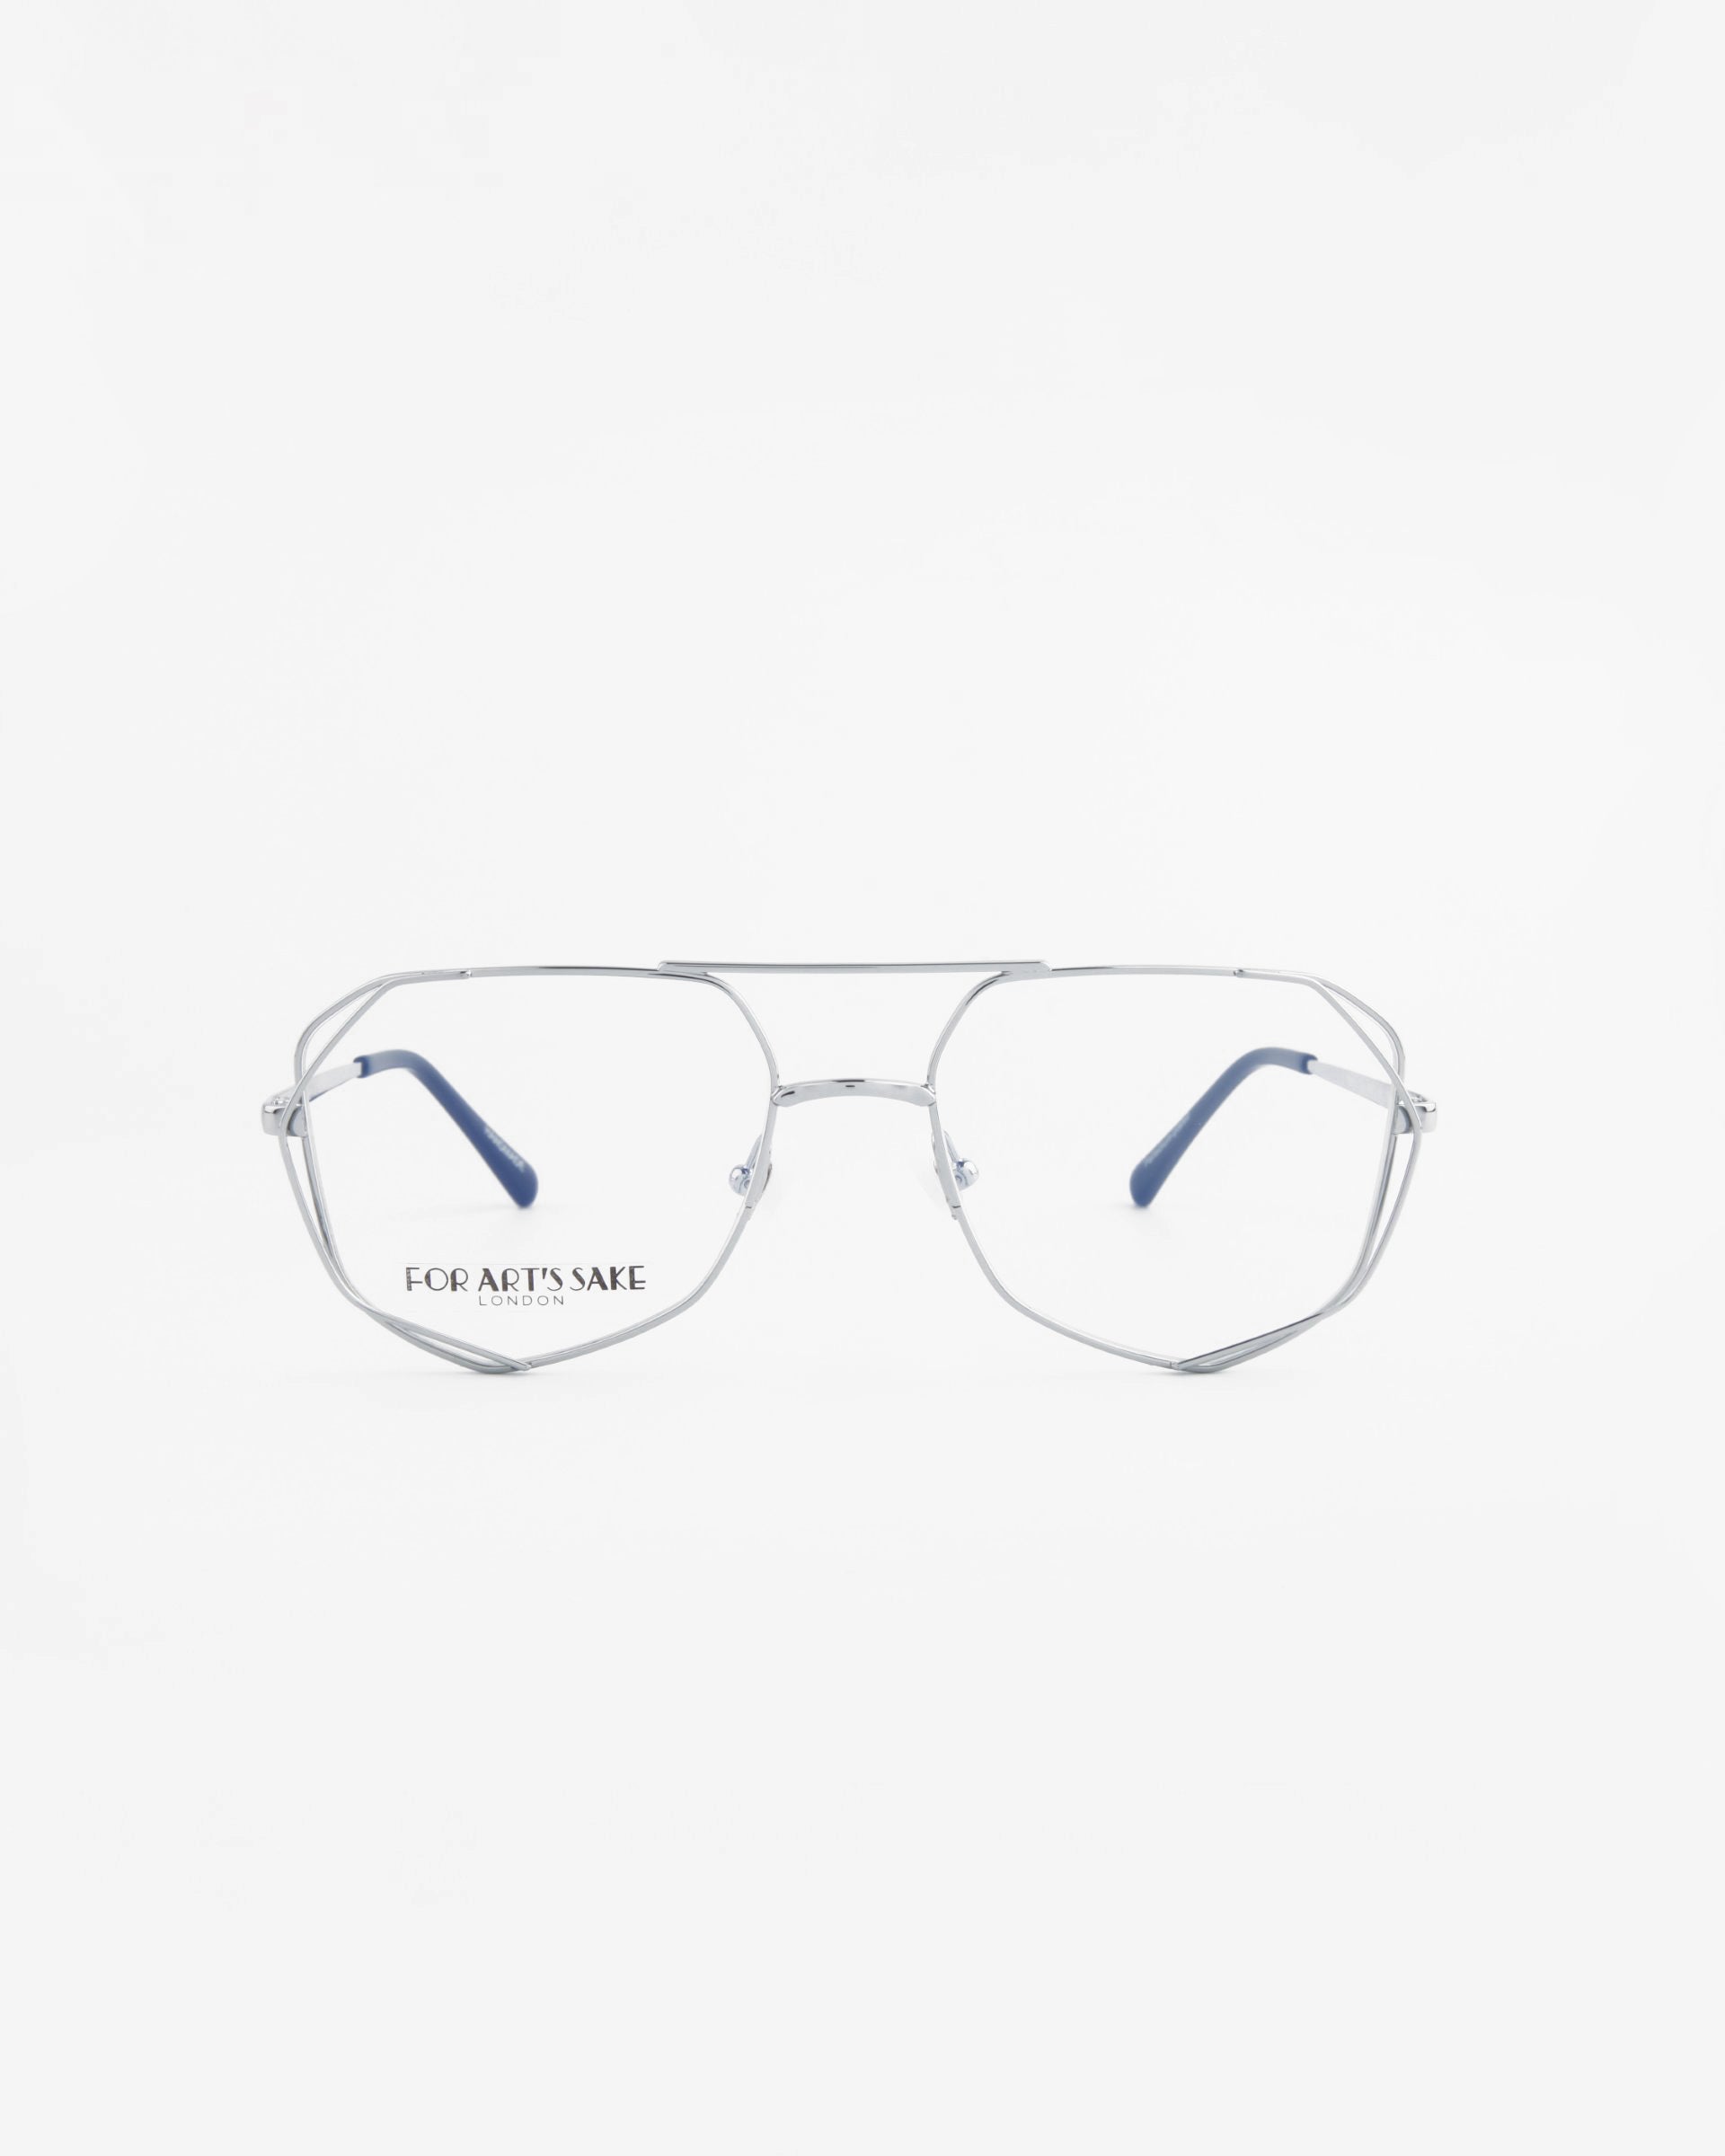 A pair of aviator-style eyeglasses with thin silver metal frames and navy blue temple tips. The lenses are clear with a built-in blue light filter, perfect for screen time. The left lens features the text "FOR ART'S SAKE." The background is a clean, solid white. These stylish eyeglasses are known as Genius Two by For Art's Sake®.